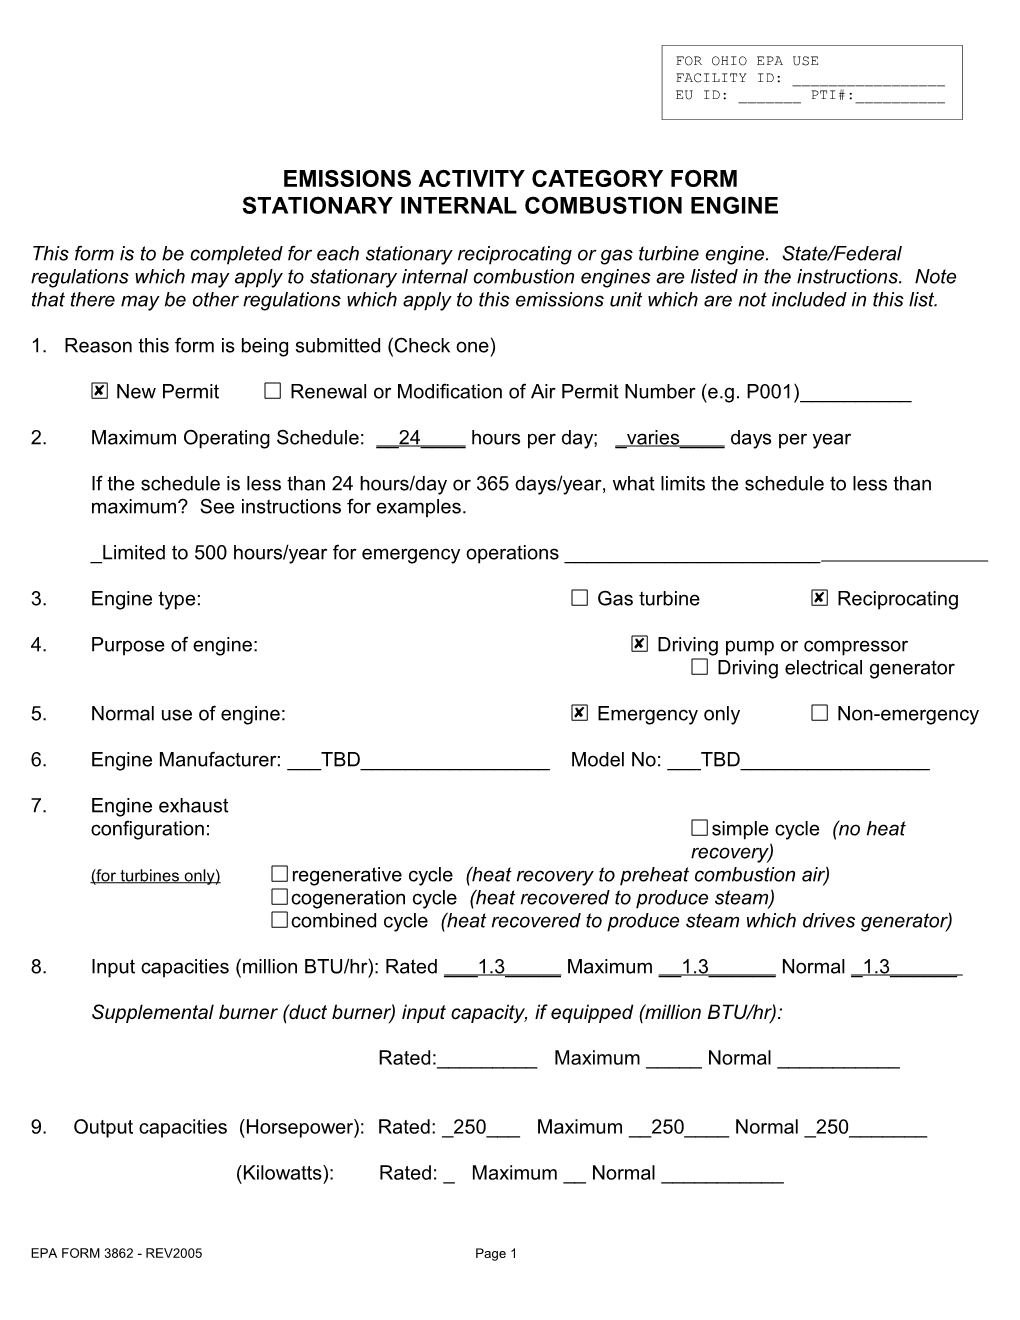 Emissions Activity Category Form s4